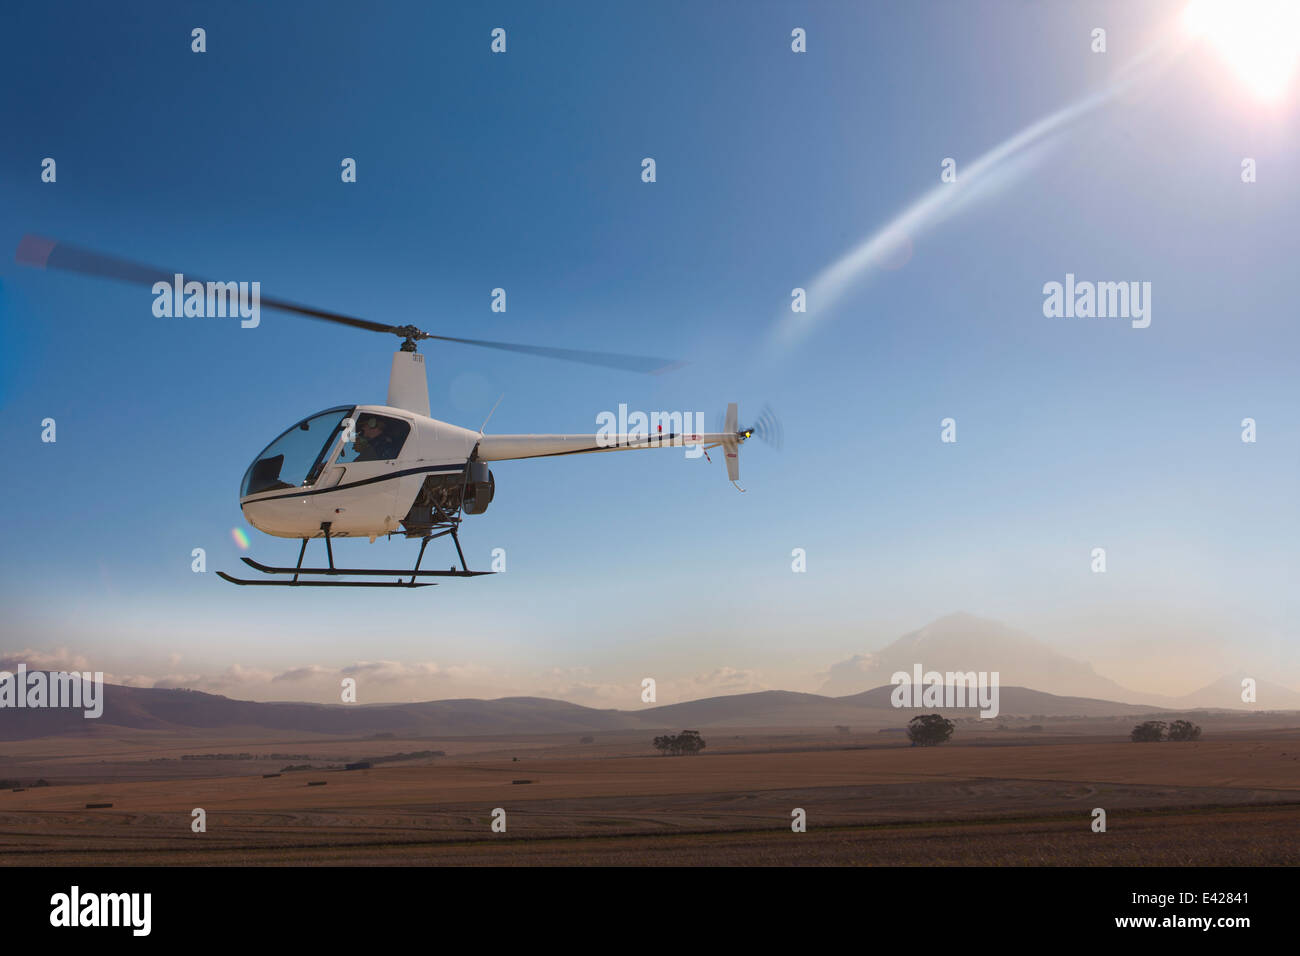 Helicopter flying close to ground Stock Photo